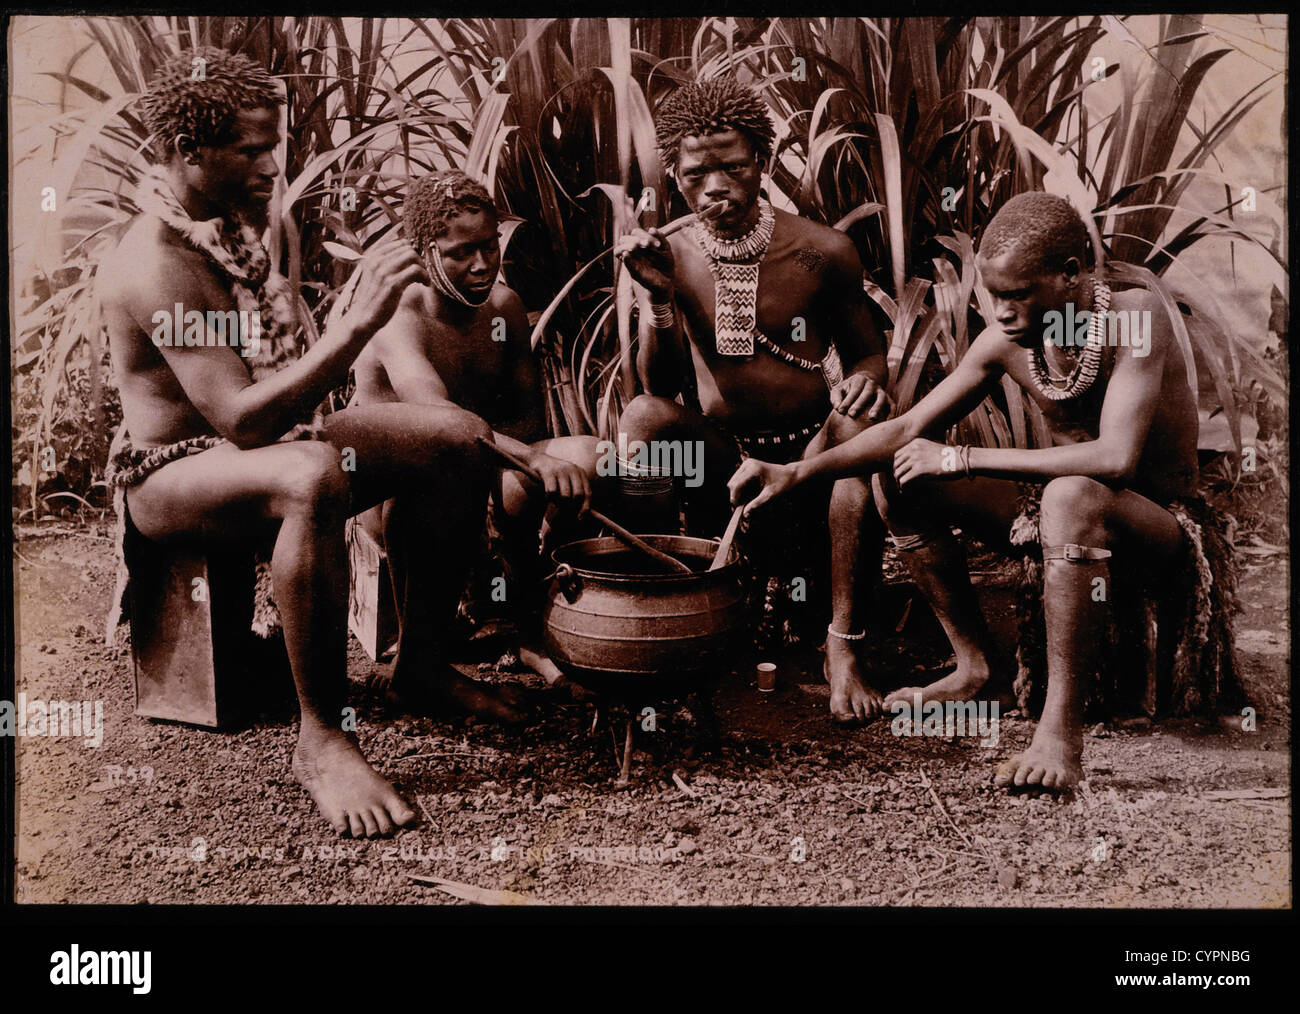 Four Zulu Men Eating From Cooking Pot, South Africa, Circa 1890 Stock Photo